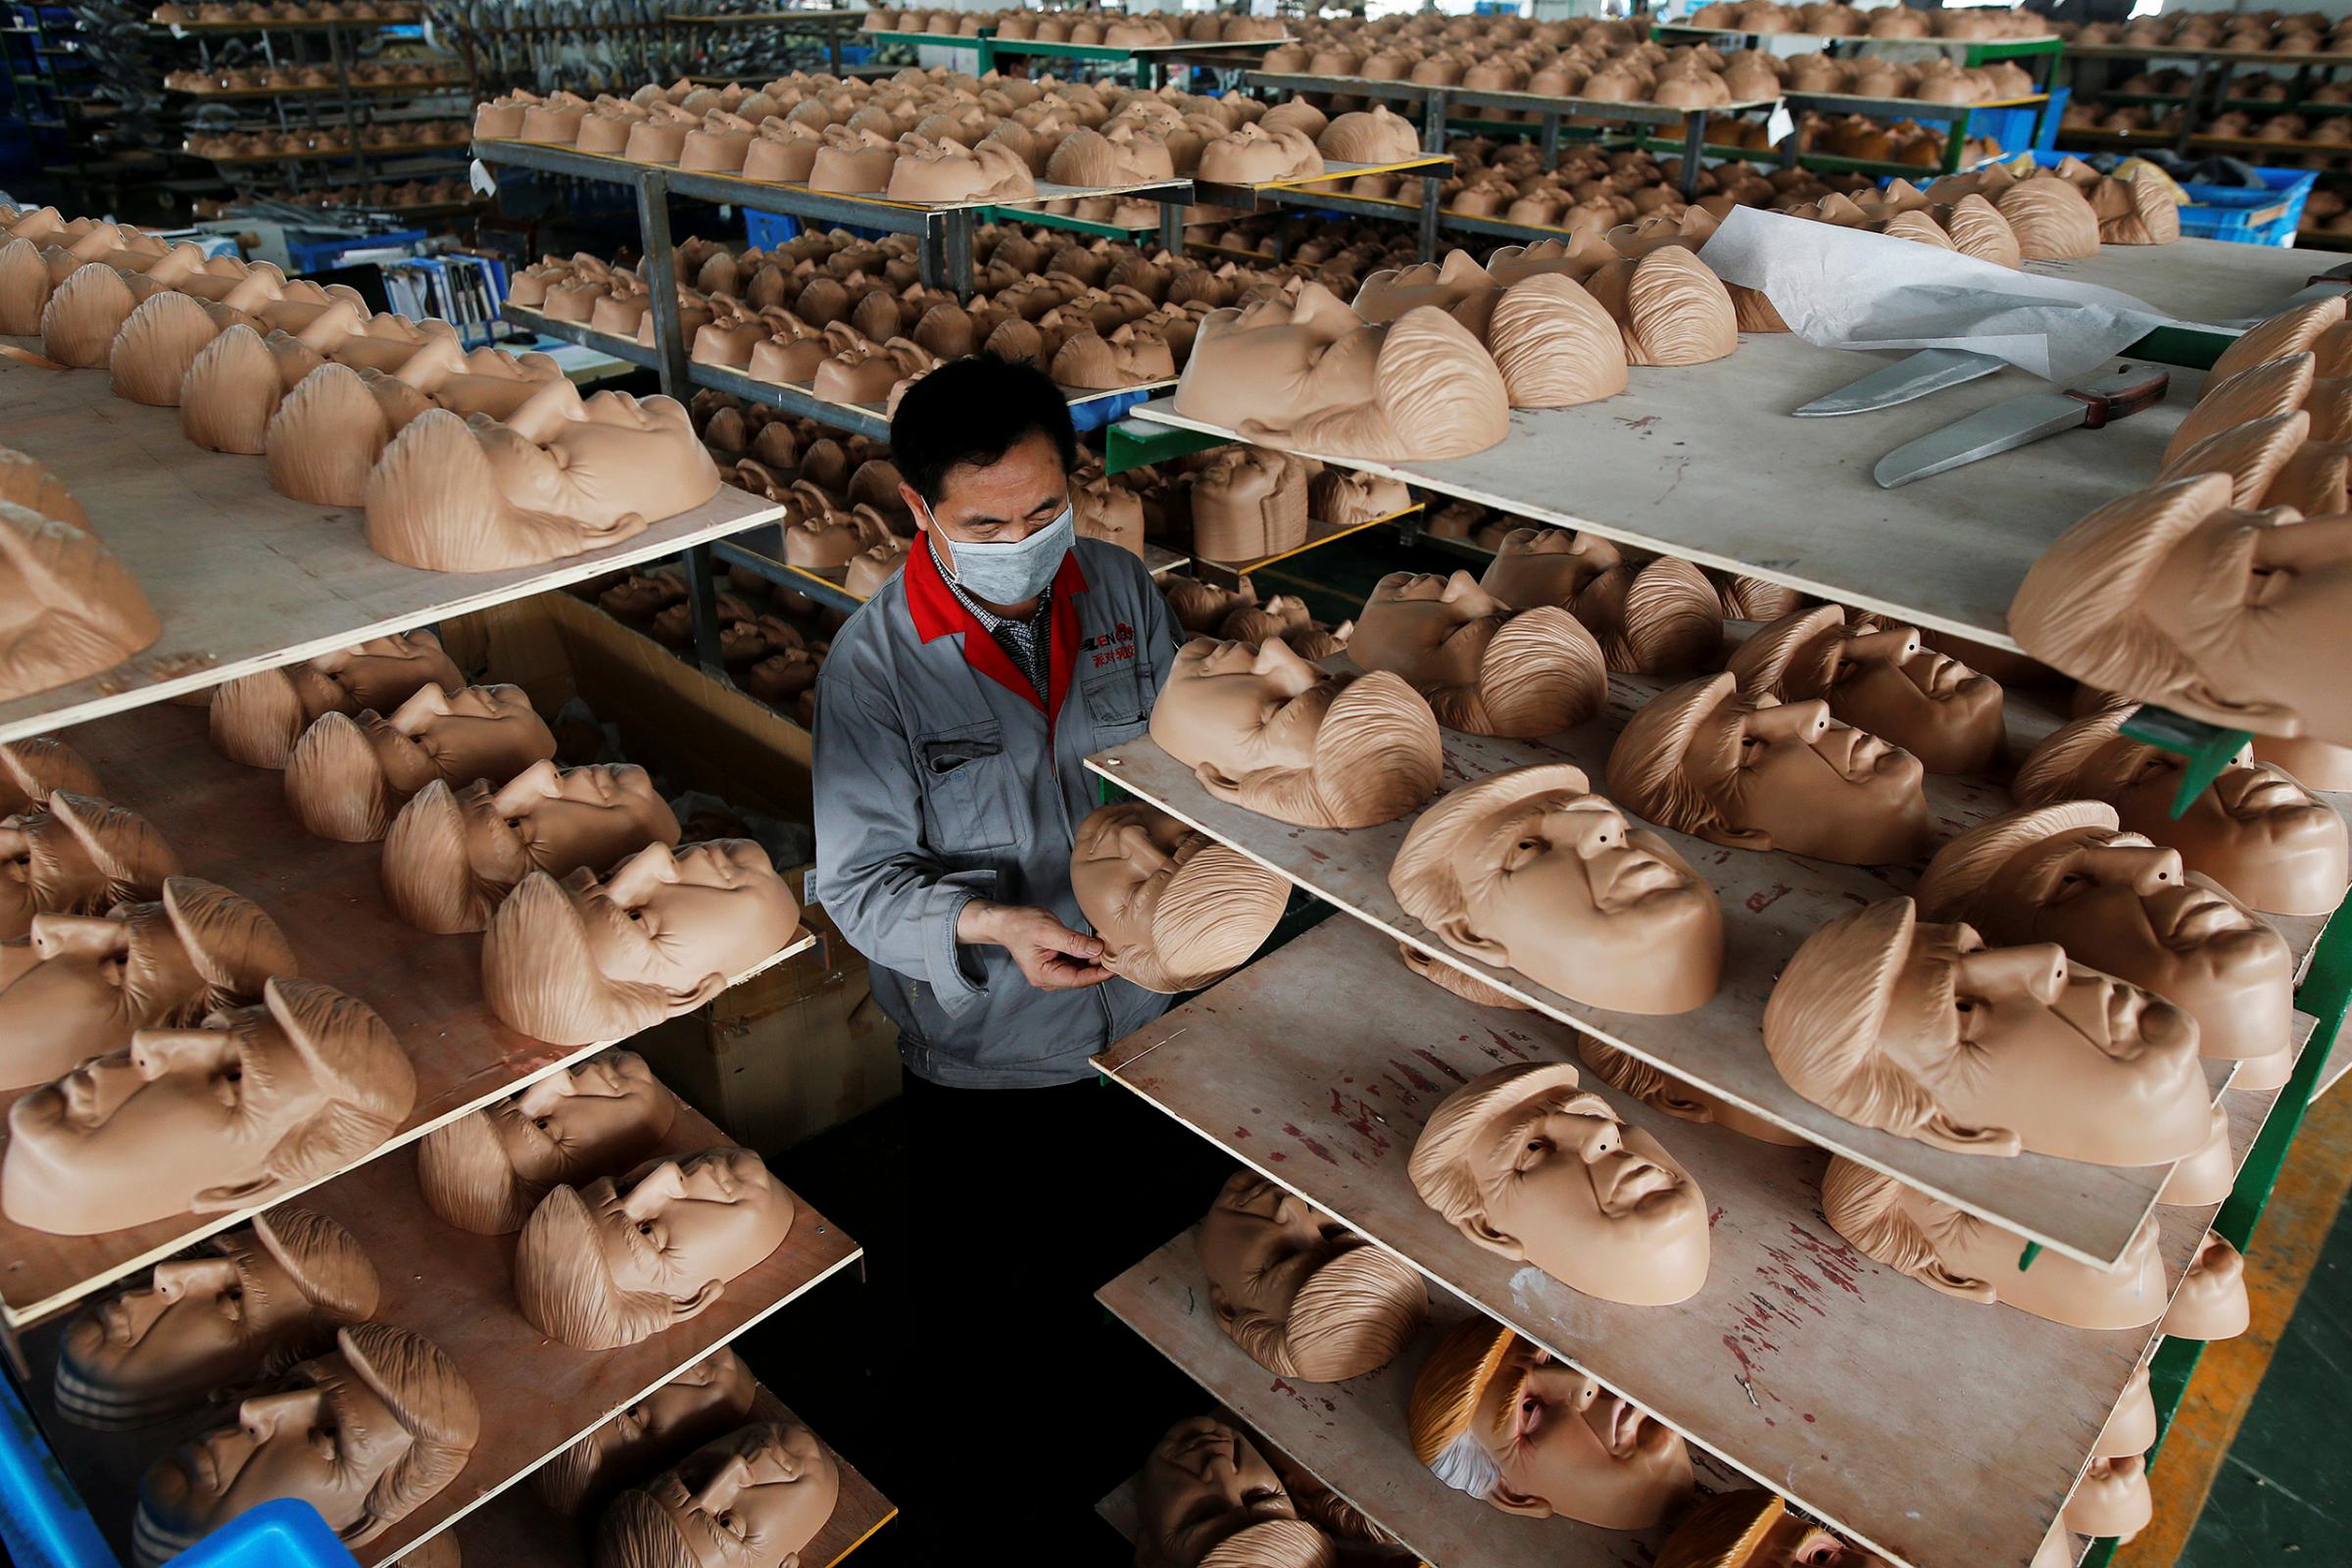 A worker checks a mask of Republican presidential candidate Donald Trump at Jinhua Partytime Latex Art and Crafts Factory in Jinhua, Zhejiang Province, China, May 25, 2016.